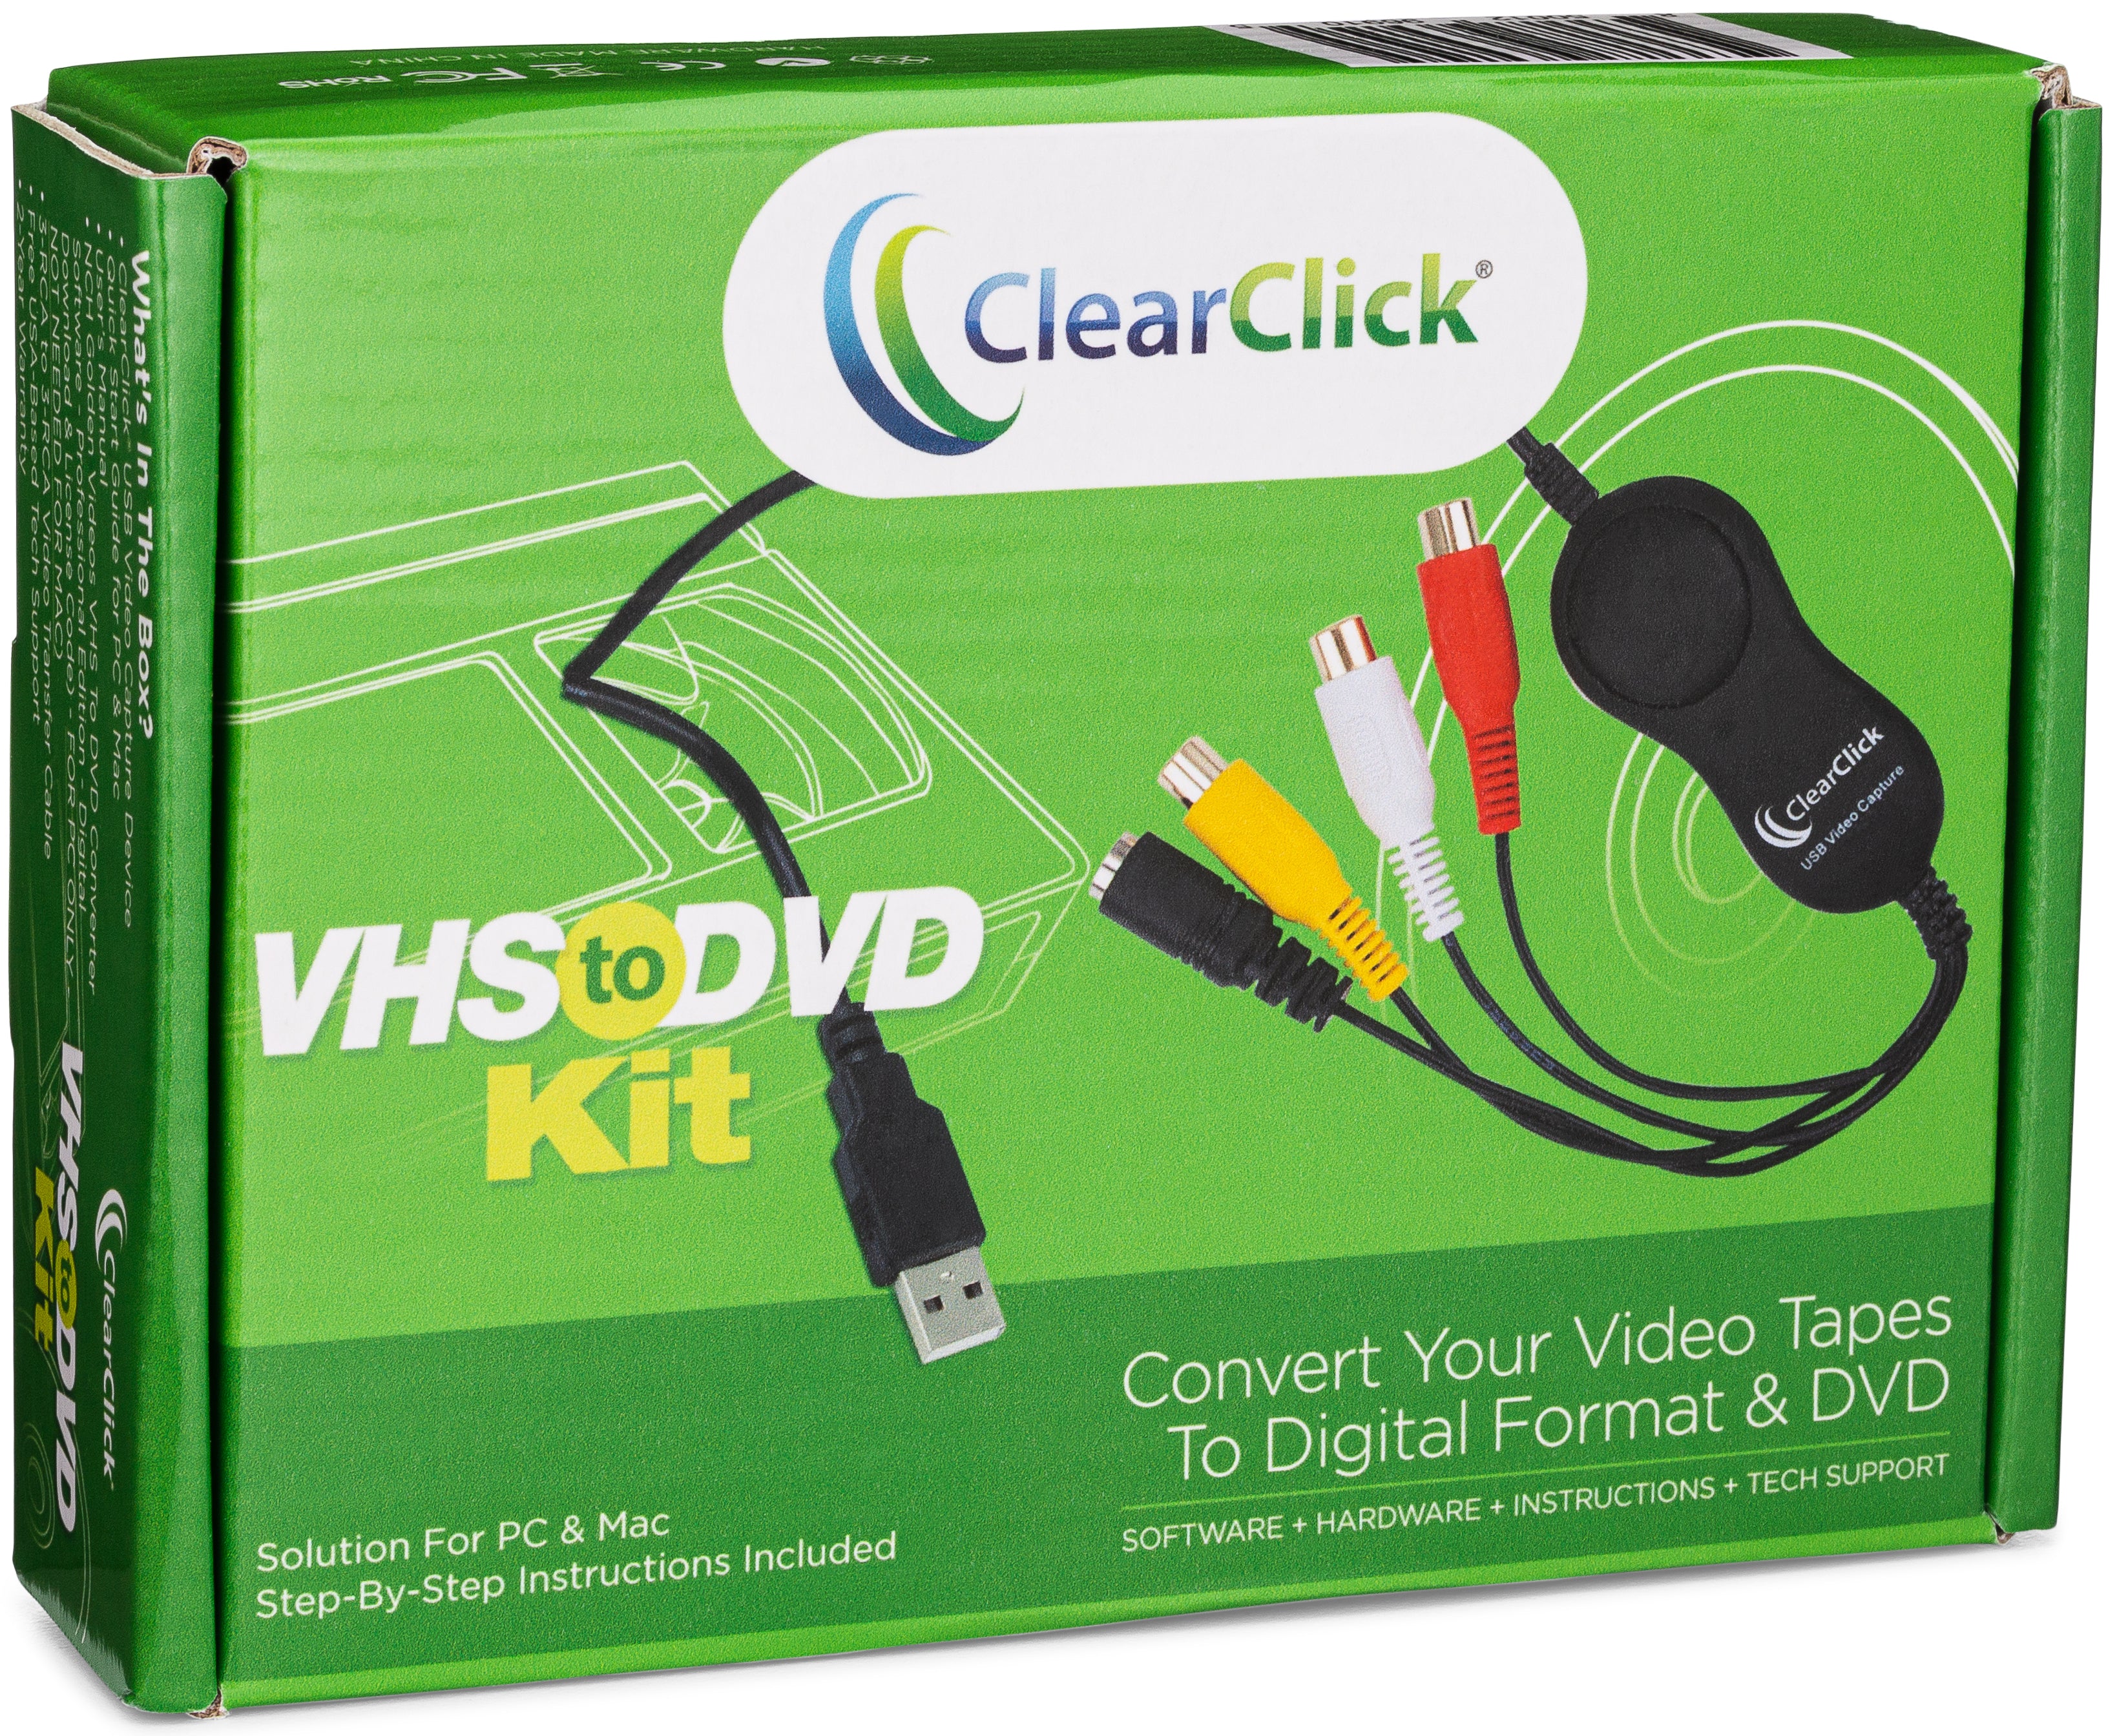 VHS to DVD Kit For PC & Mac  Convert Any Video Tape To Digital